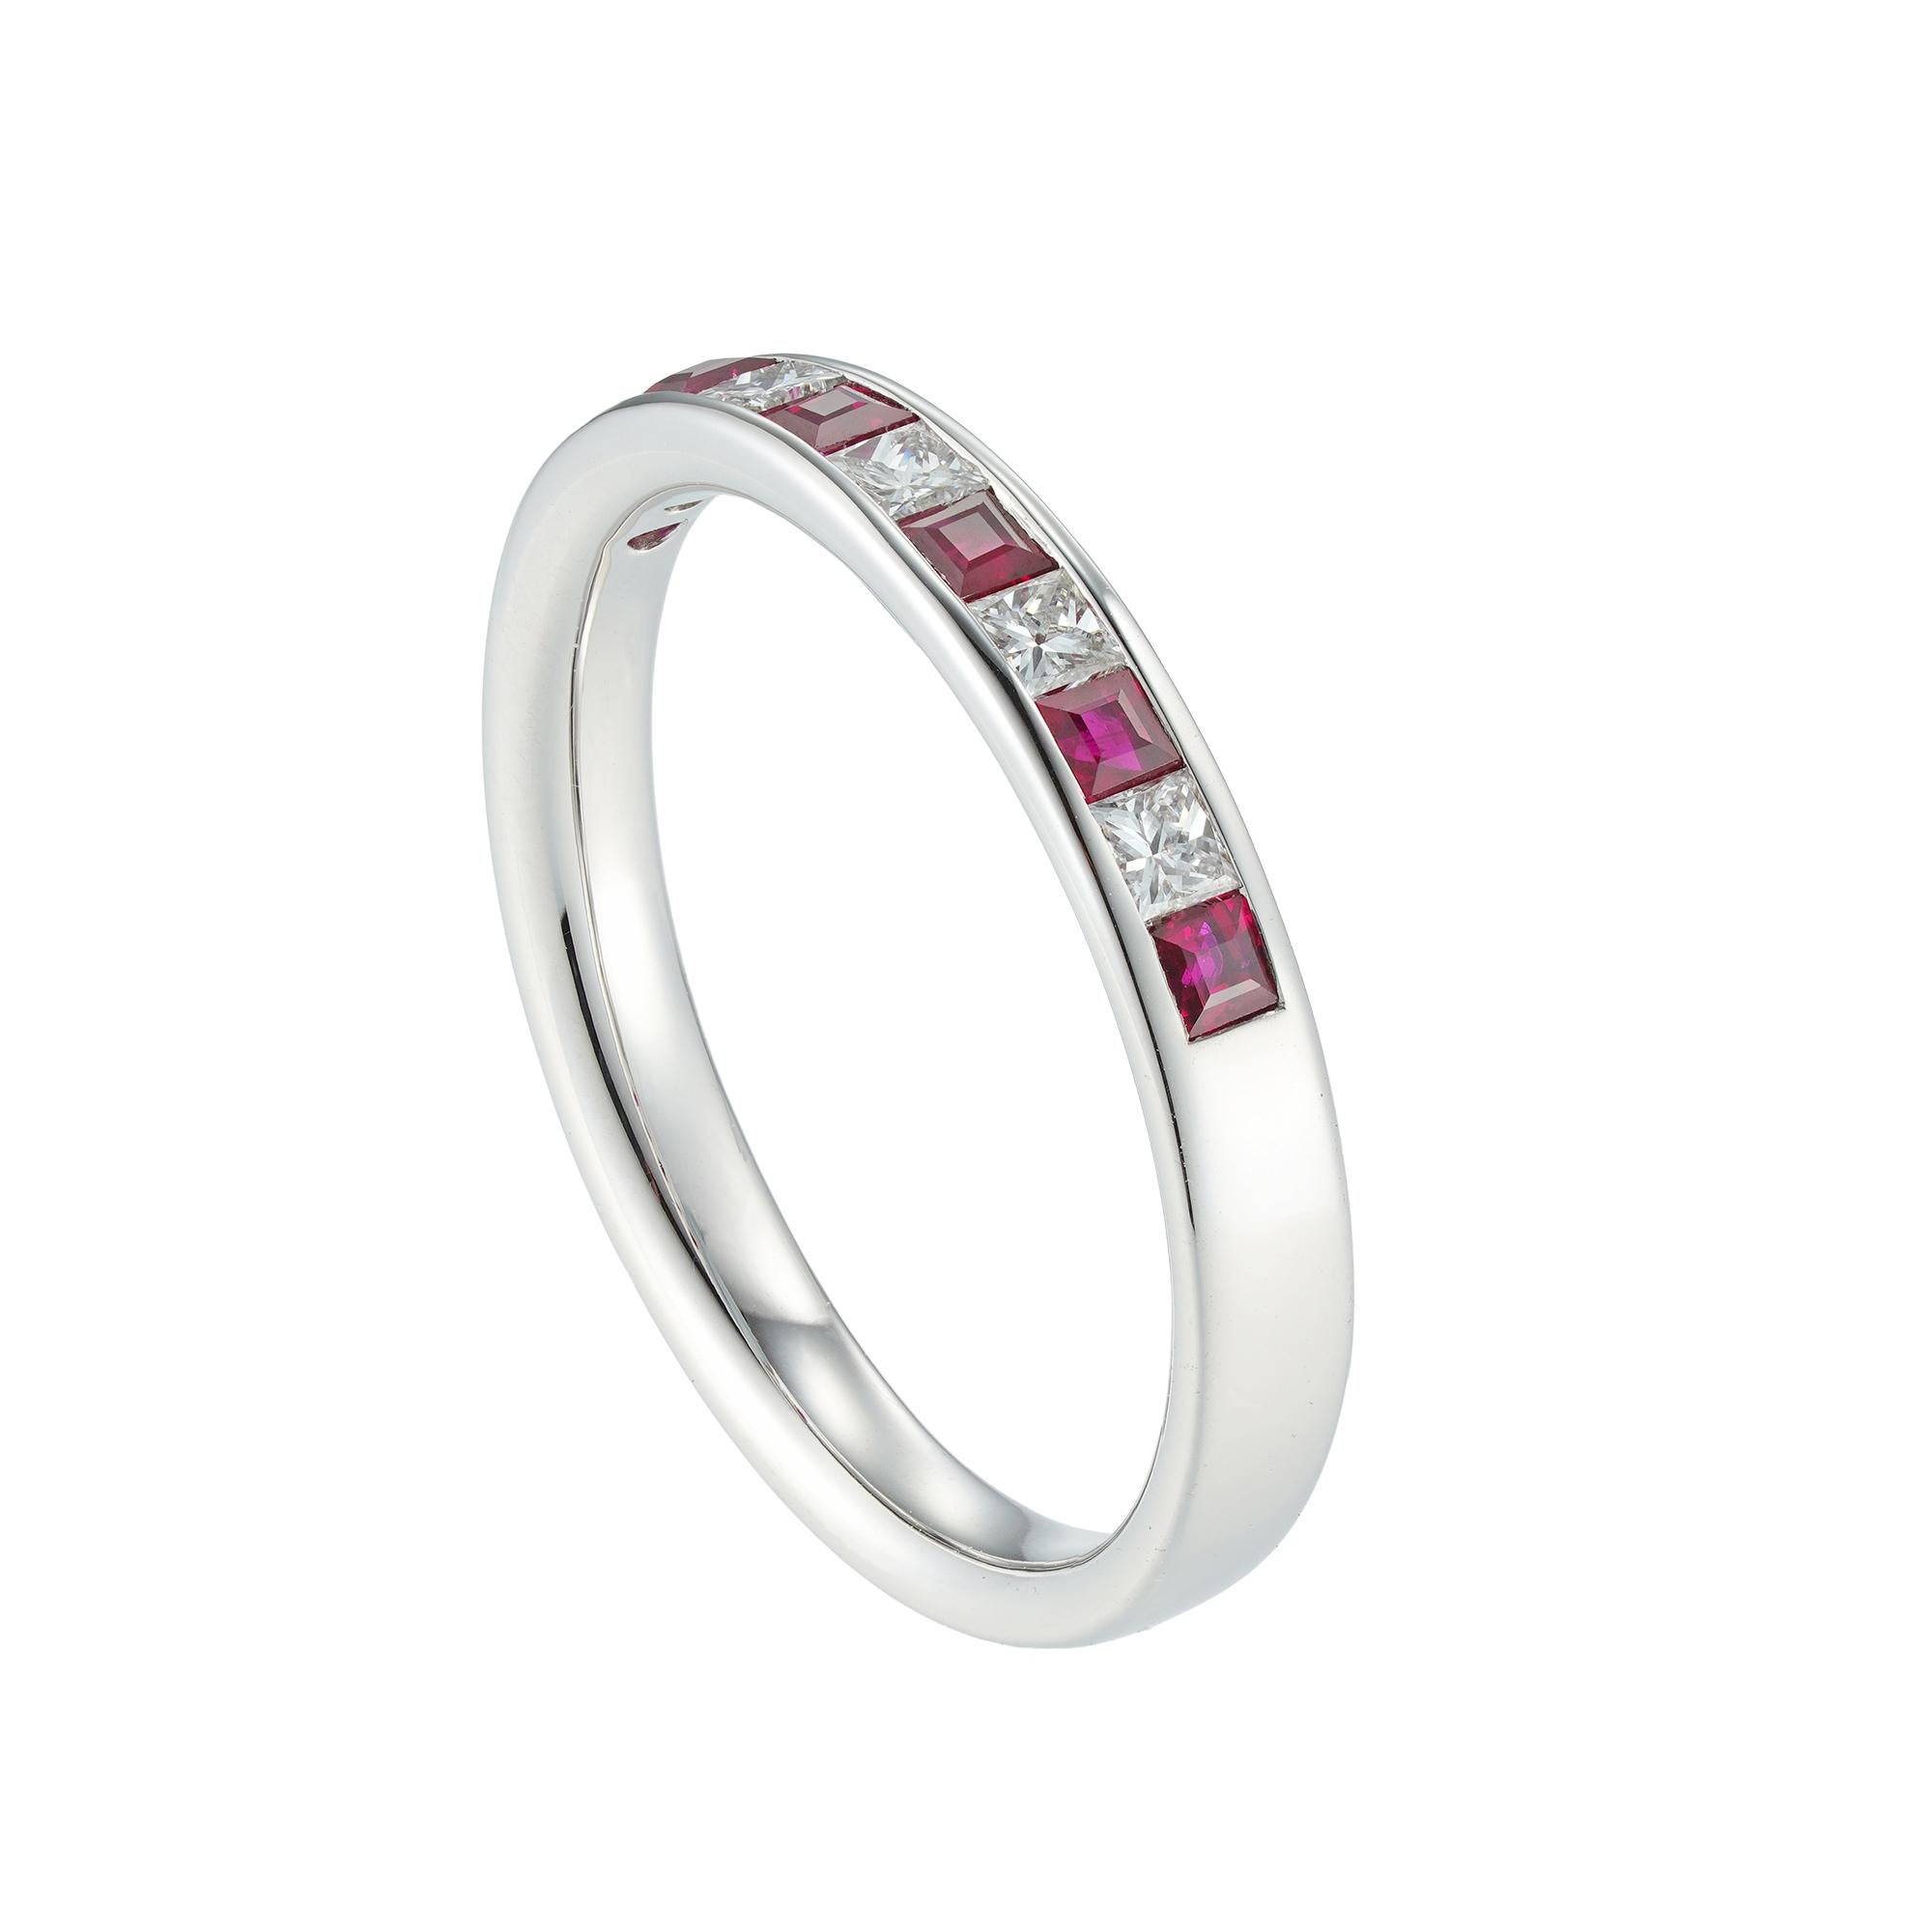 A ruby and diamond half eternity ring, consisting of six princess-cut rubies weighing 0.31 carats set with five princess-cut diamonds in-between, the diamonds weighing 0.2 carats in total, all channel-set in white gold mount, hallmarked 18ct gold